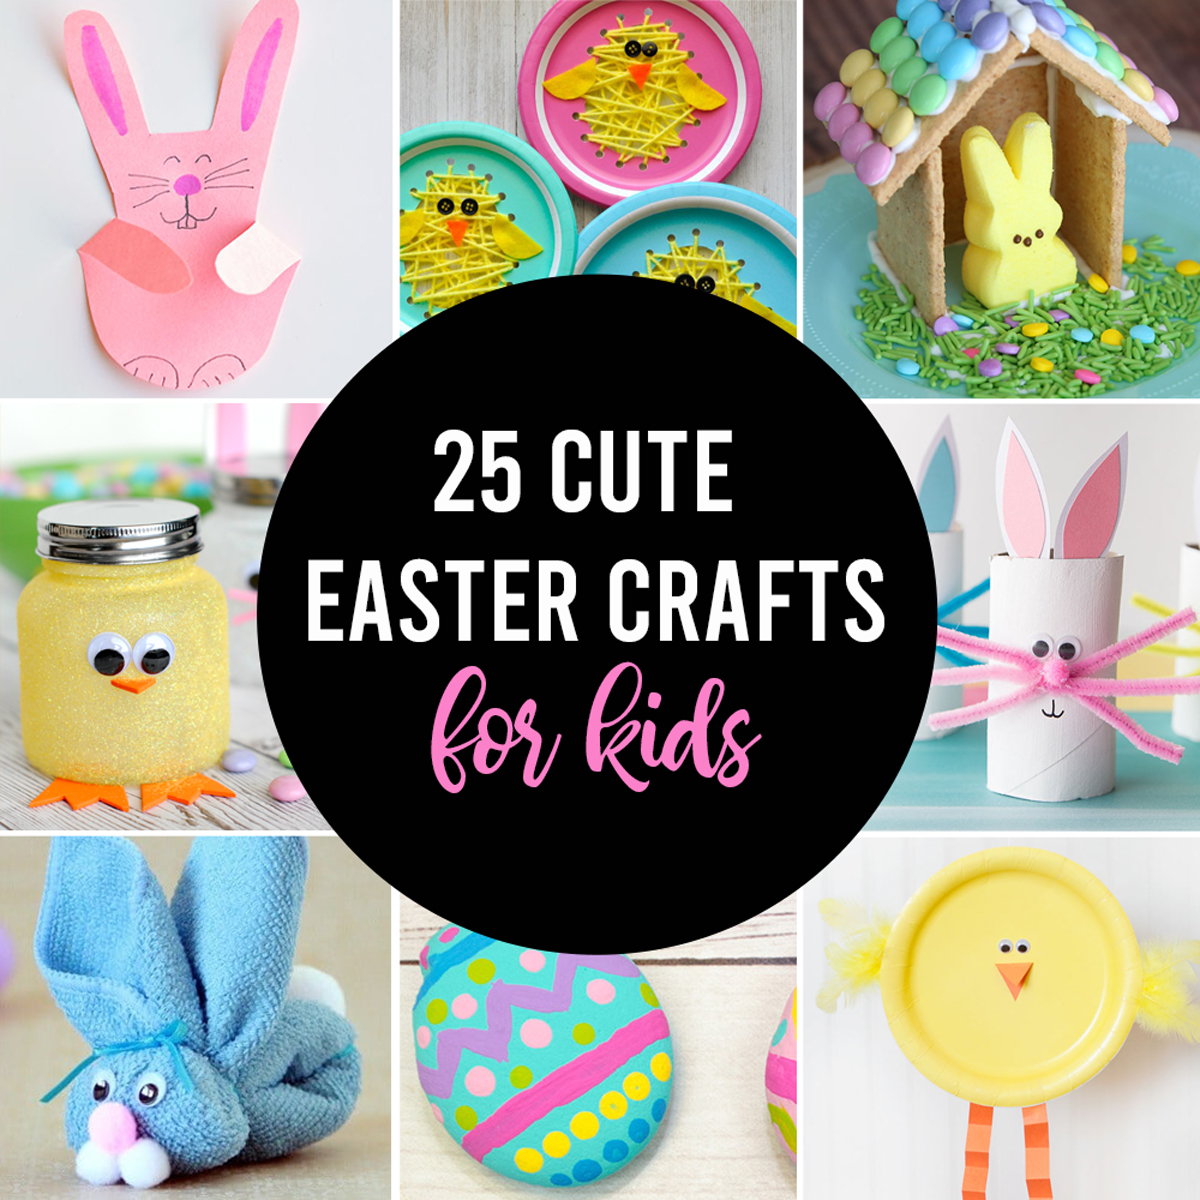 Easter Crafts for Kids They'll Love to Make - DIY Candy